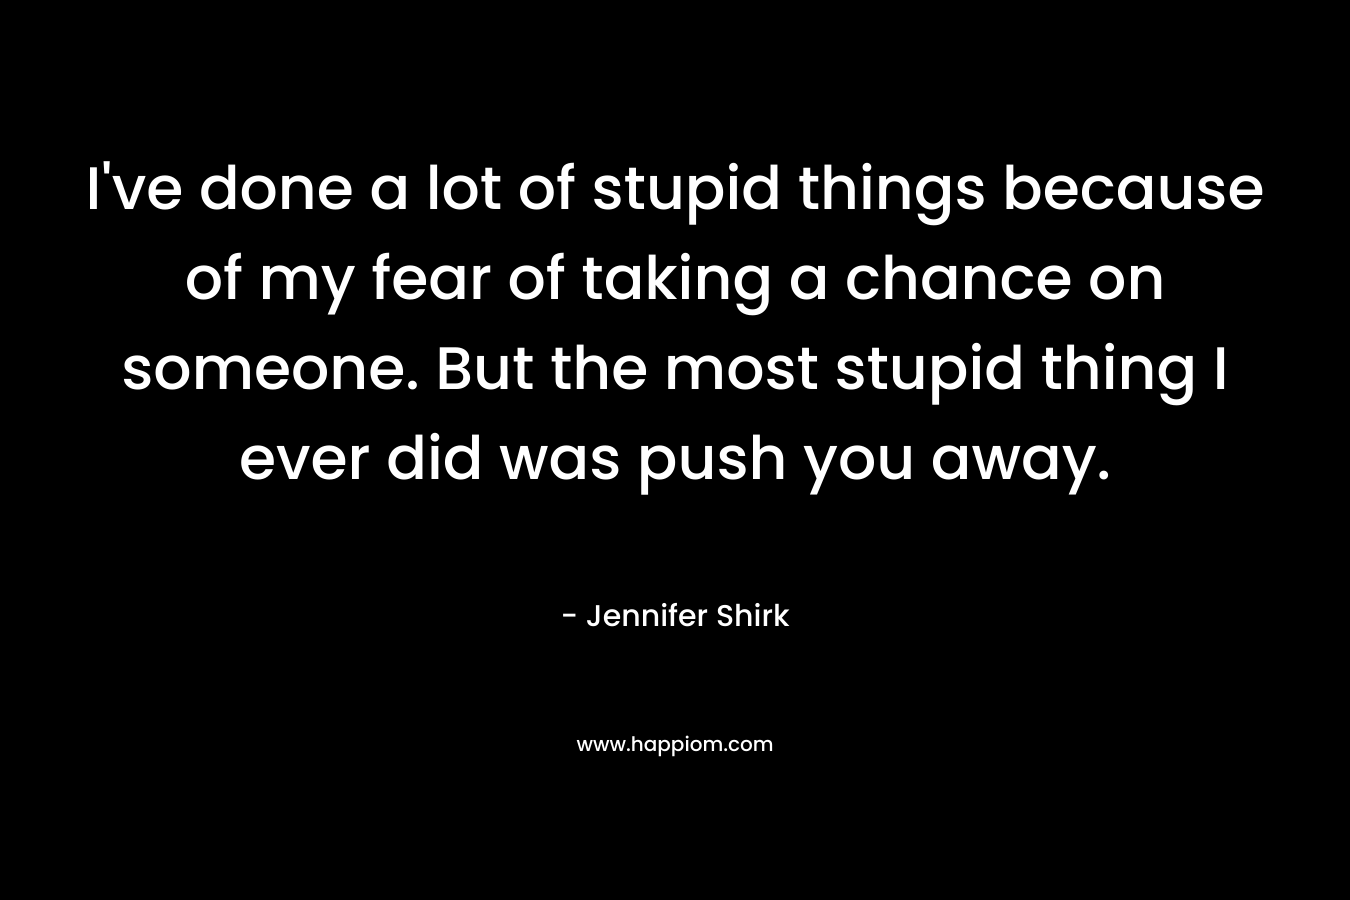 I’ve done a lot of stupid things because of my fear of taking a chance on someone. But the most stupid thing I ever did was push you away. – Jennifer Shirk